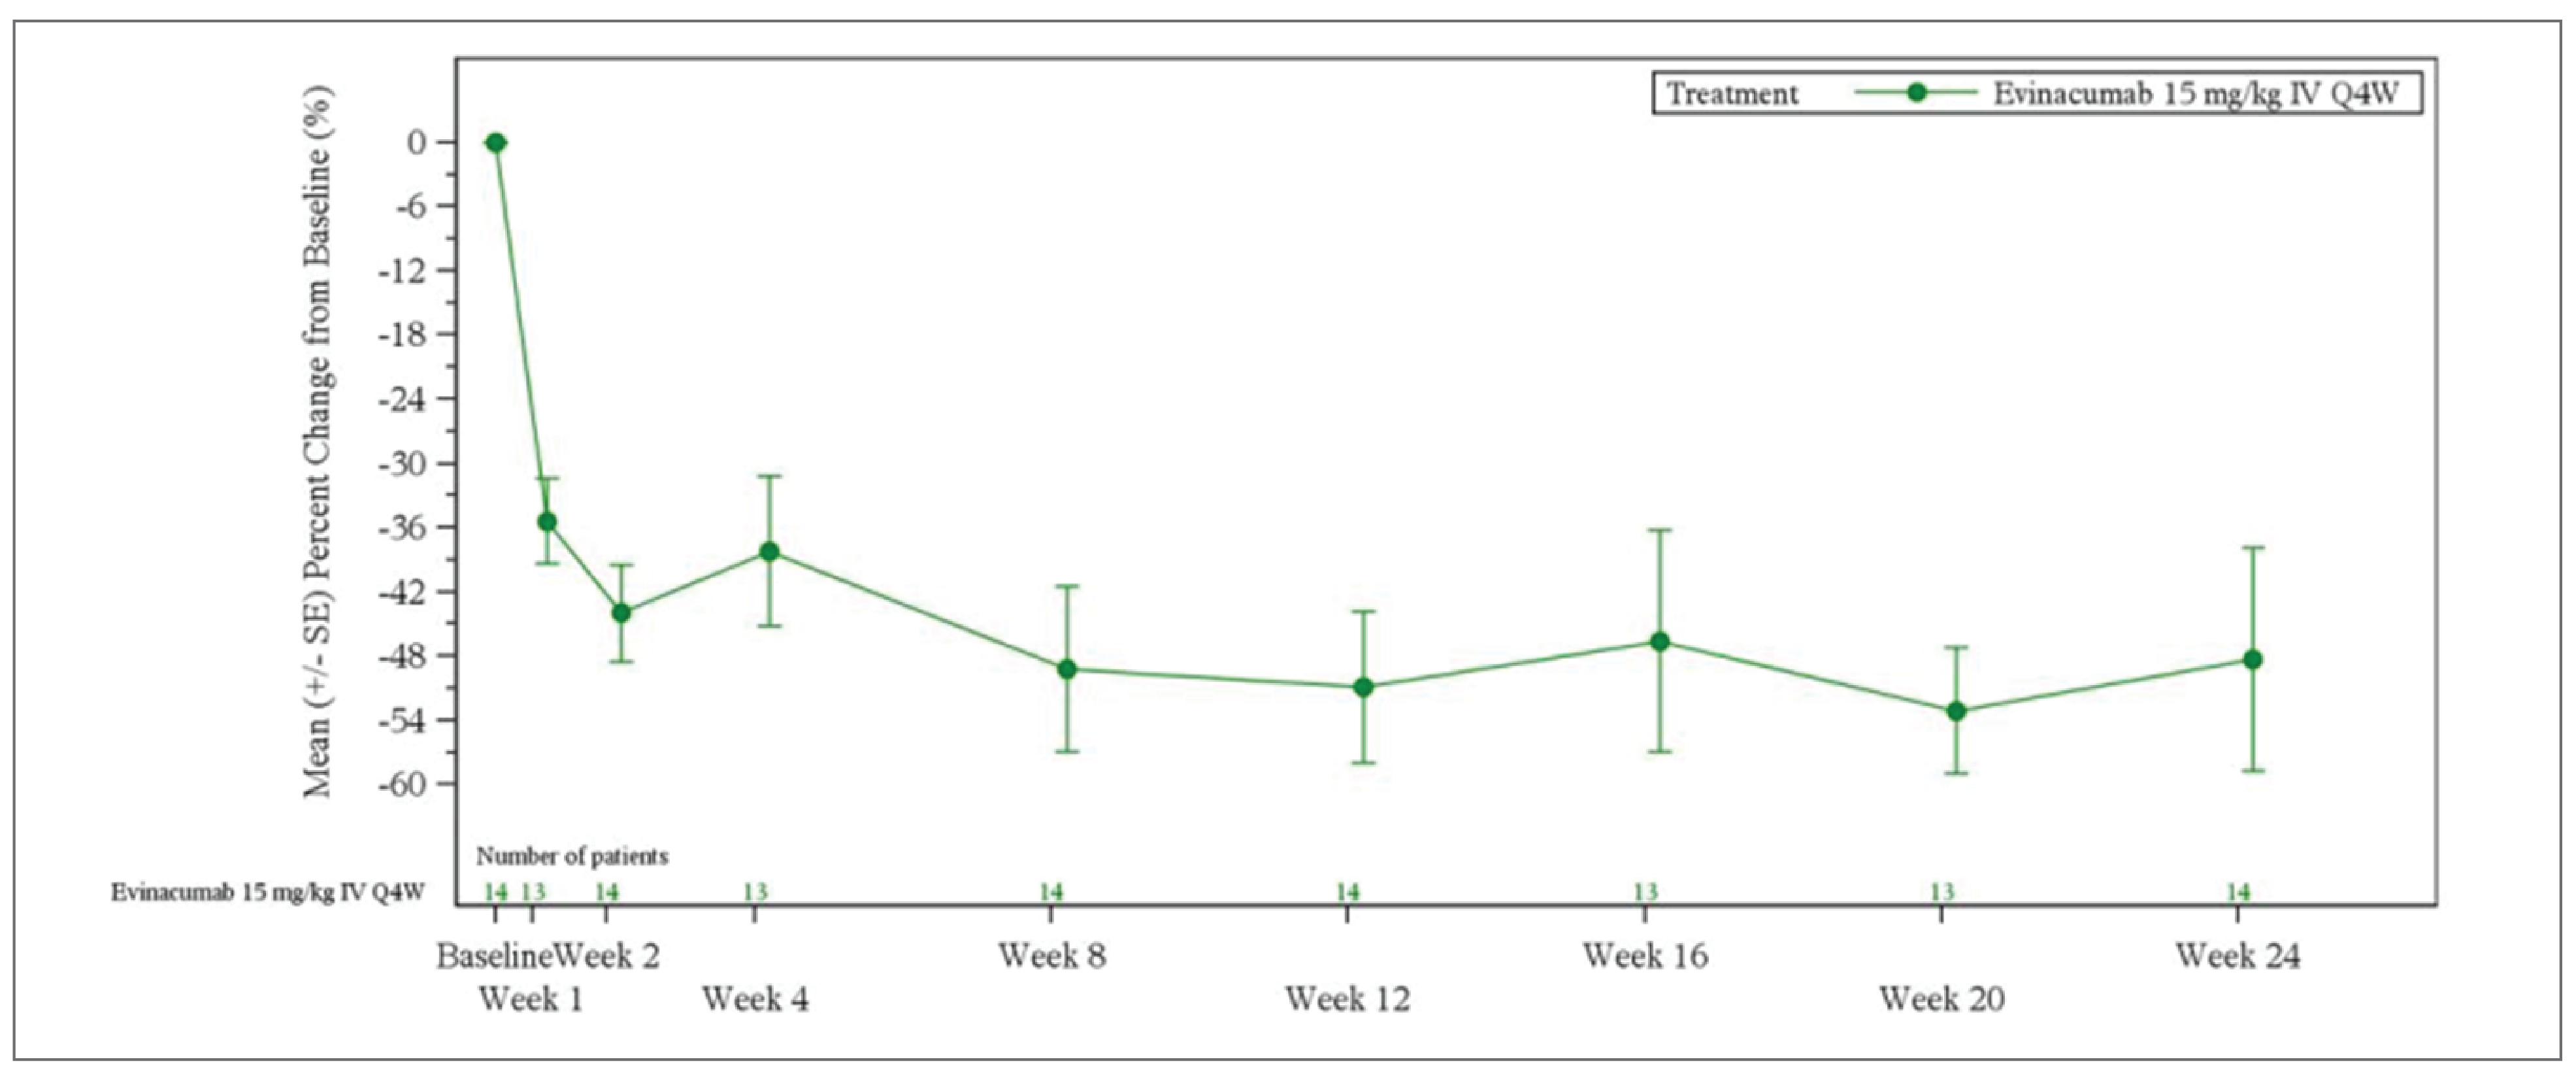 Plot of mean percent change in LDL-C over time in 14 patients receiving evinacumab in Part B of the CL-17100 study. A sharp decrease in LDL-C levels to below 40% is seen at week 2 with evinacumab which is sustained until the end of the treatment period (24 weeks).